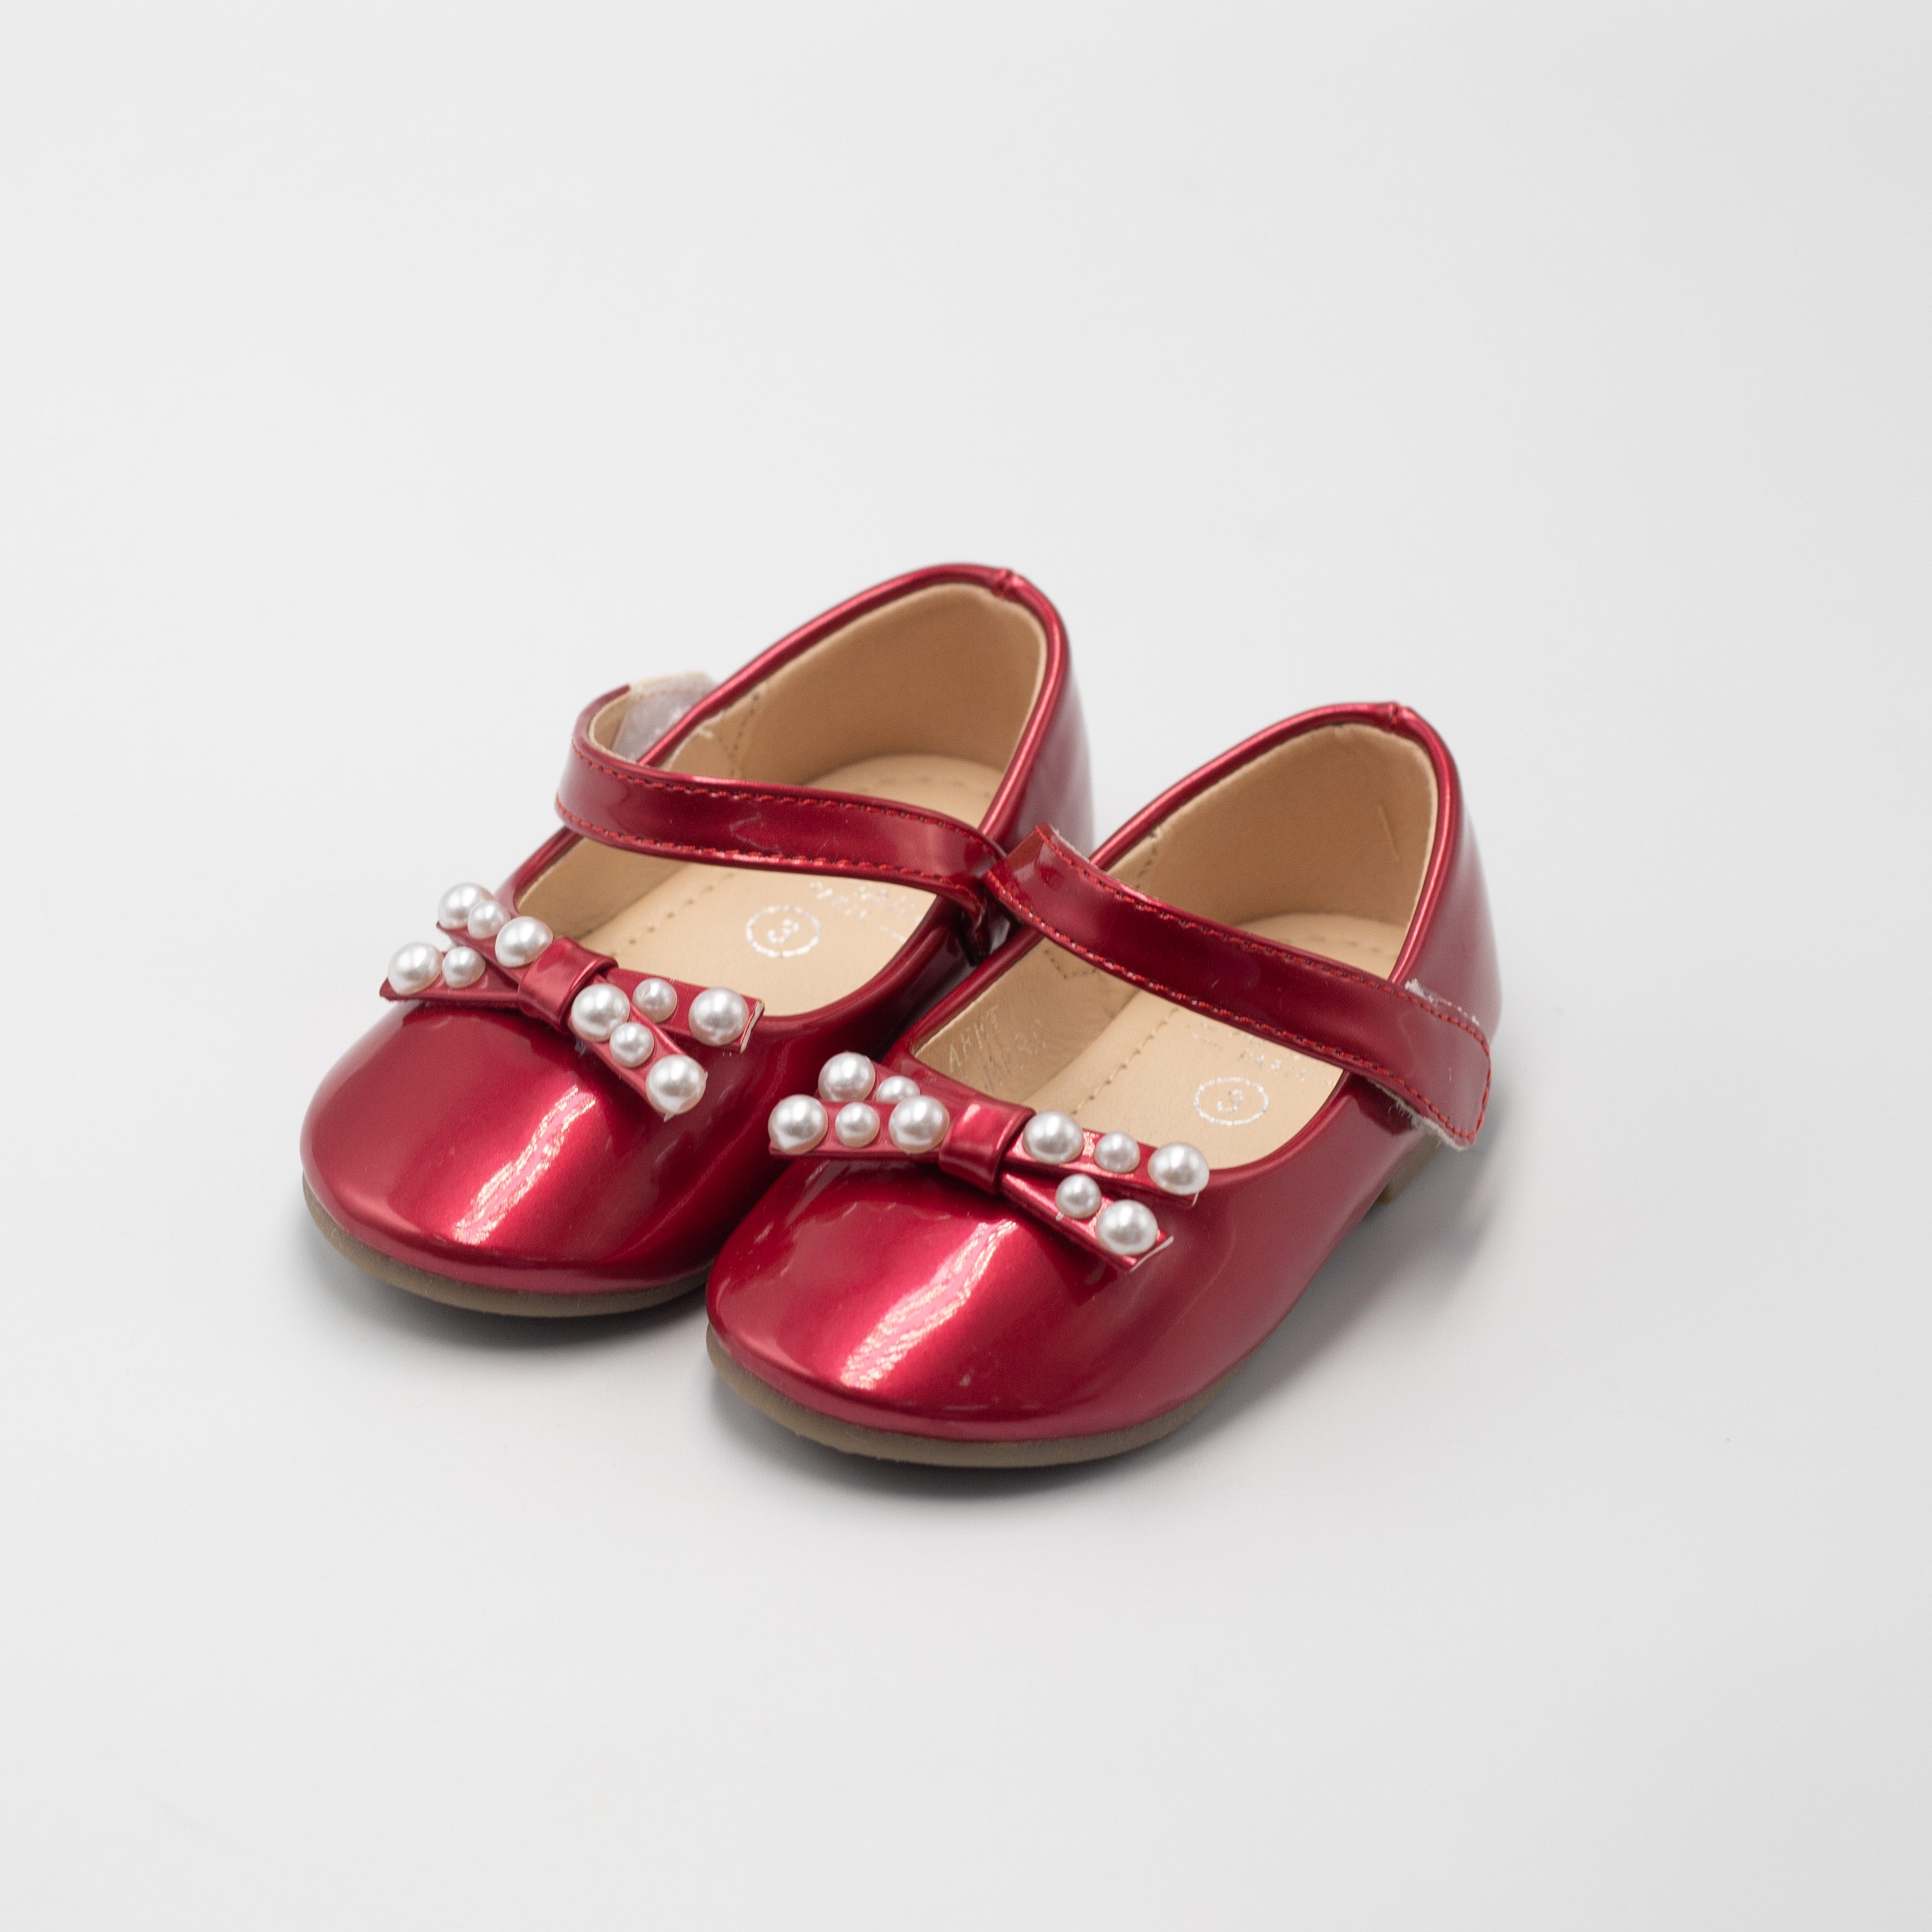 Afet baby girls patent pump with pearl on a bow red